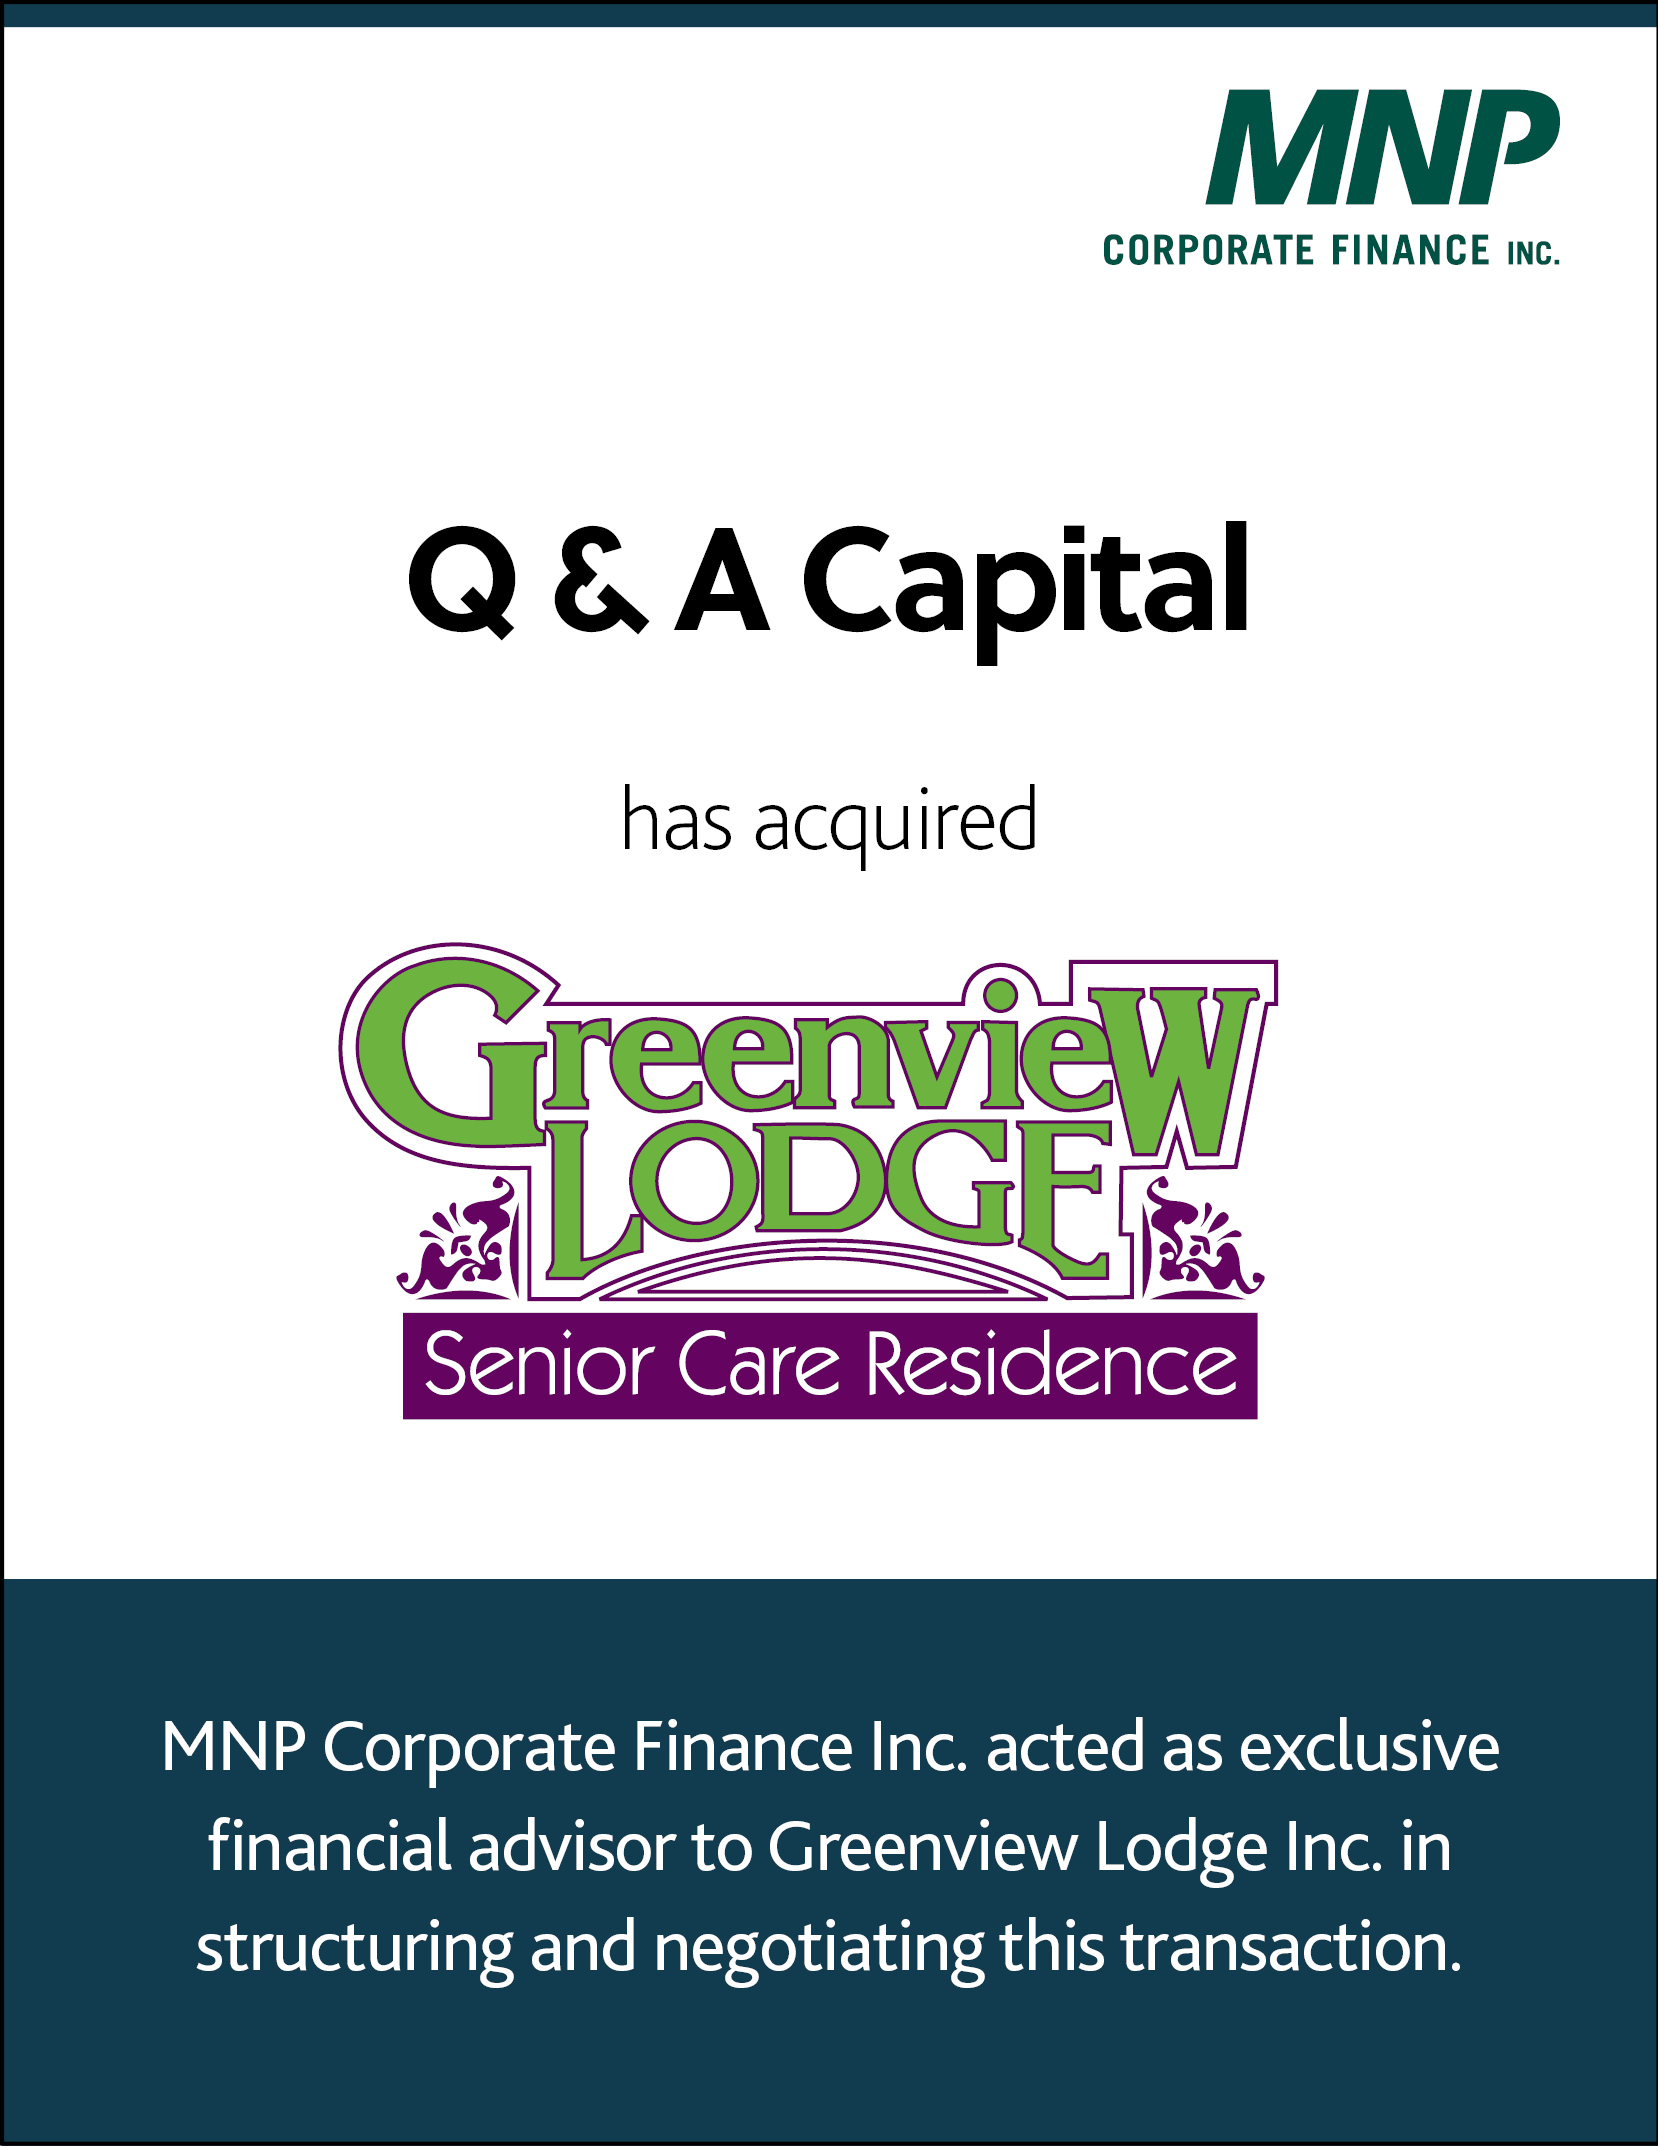 Q & A Capital has acquired Greenview Lodge